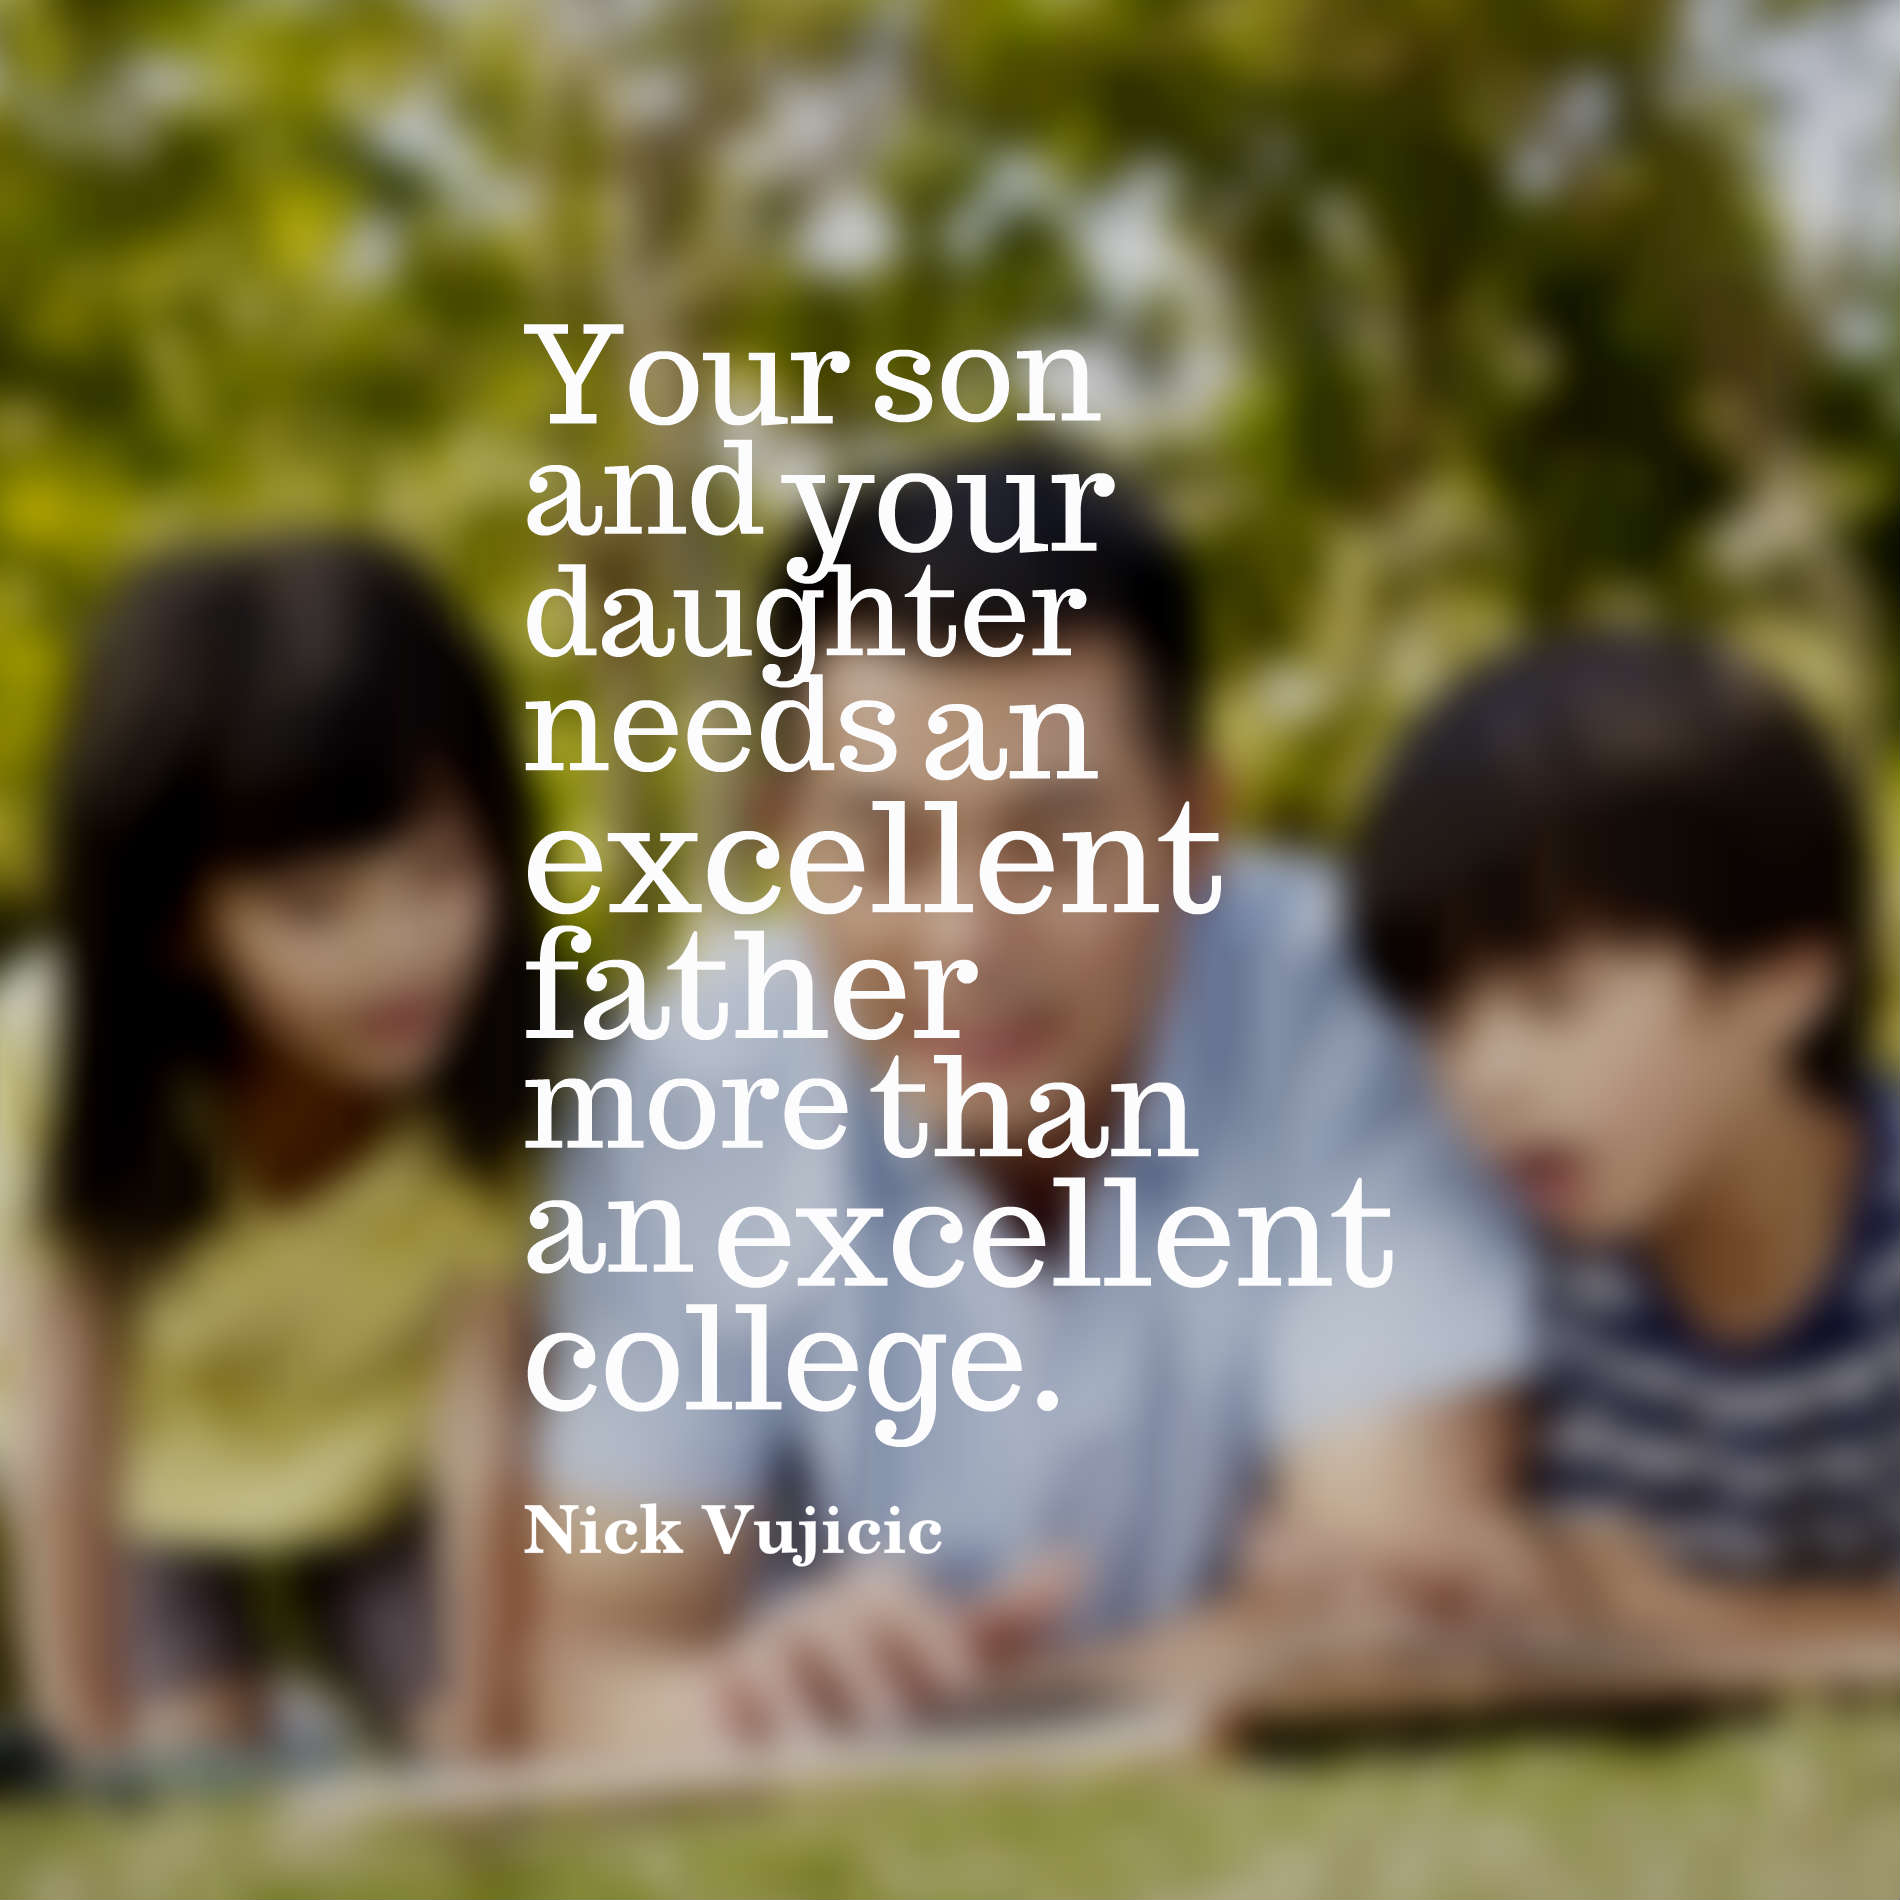 Your son and your daughter needs an excellent father more than an excellent college.